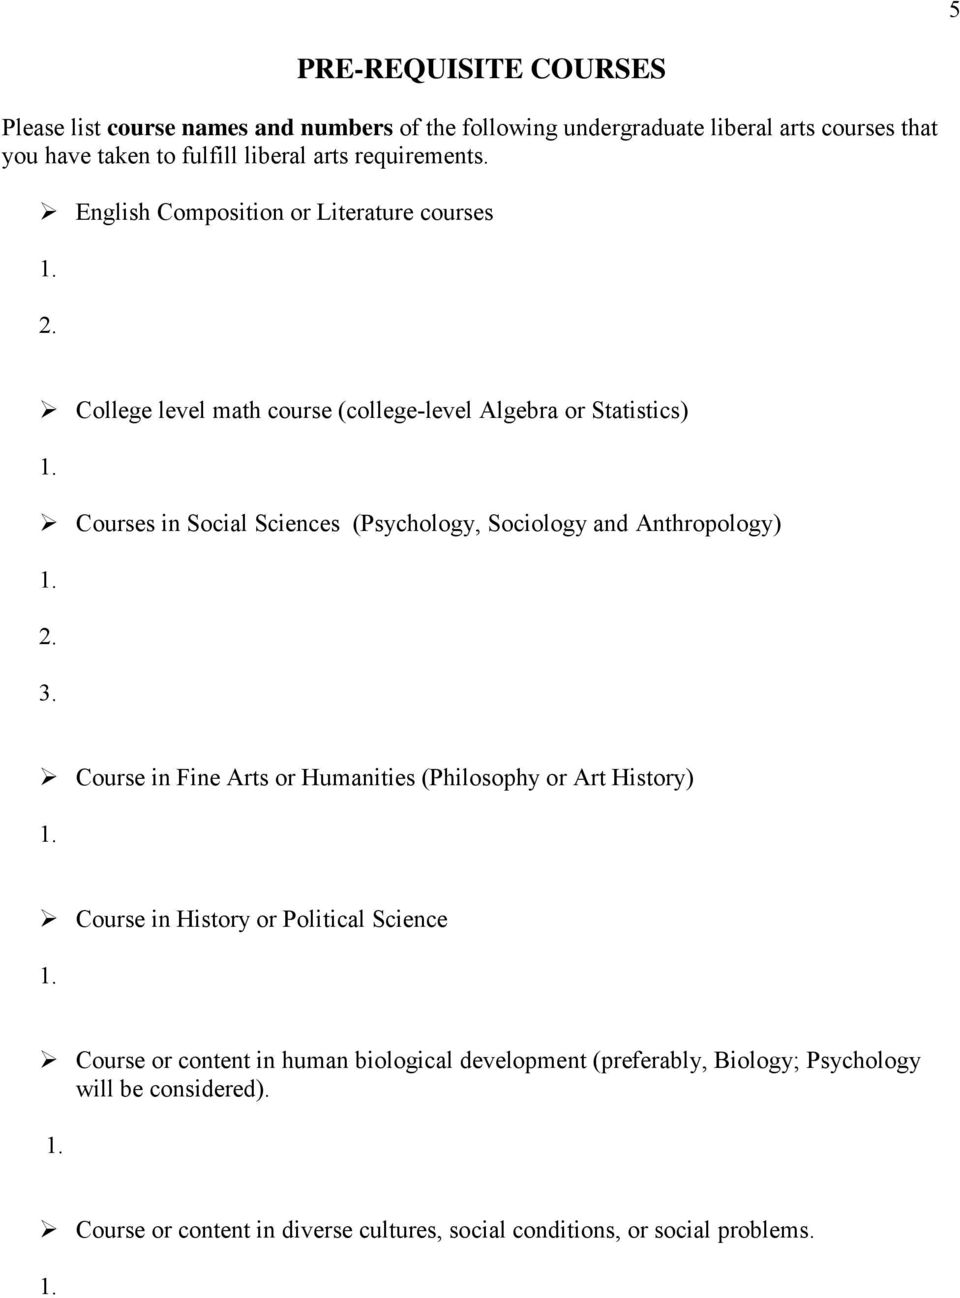 College level math course (college-level Algebra or Statistics) Courses in Social Sciences (Psychology, Sociology and Anthropology) 2. 3.